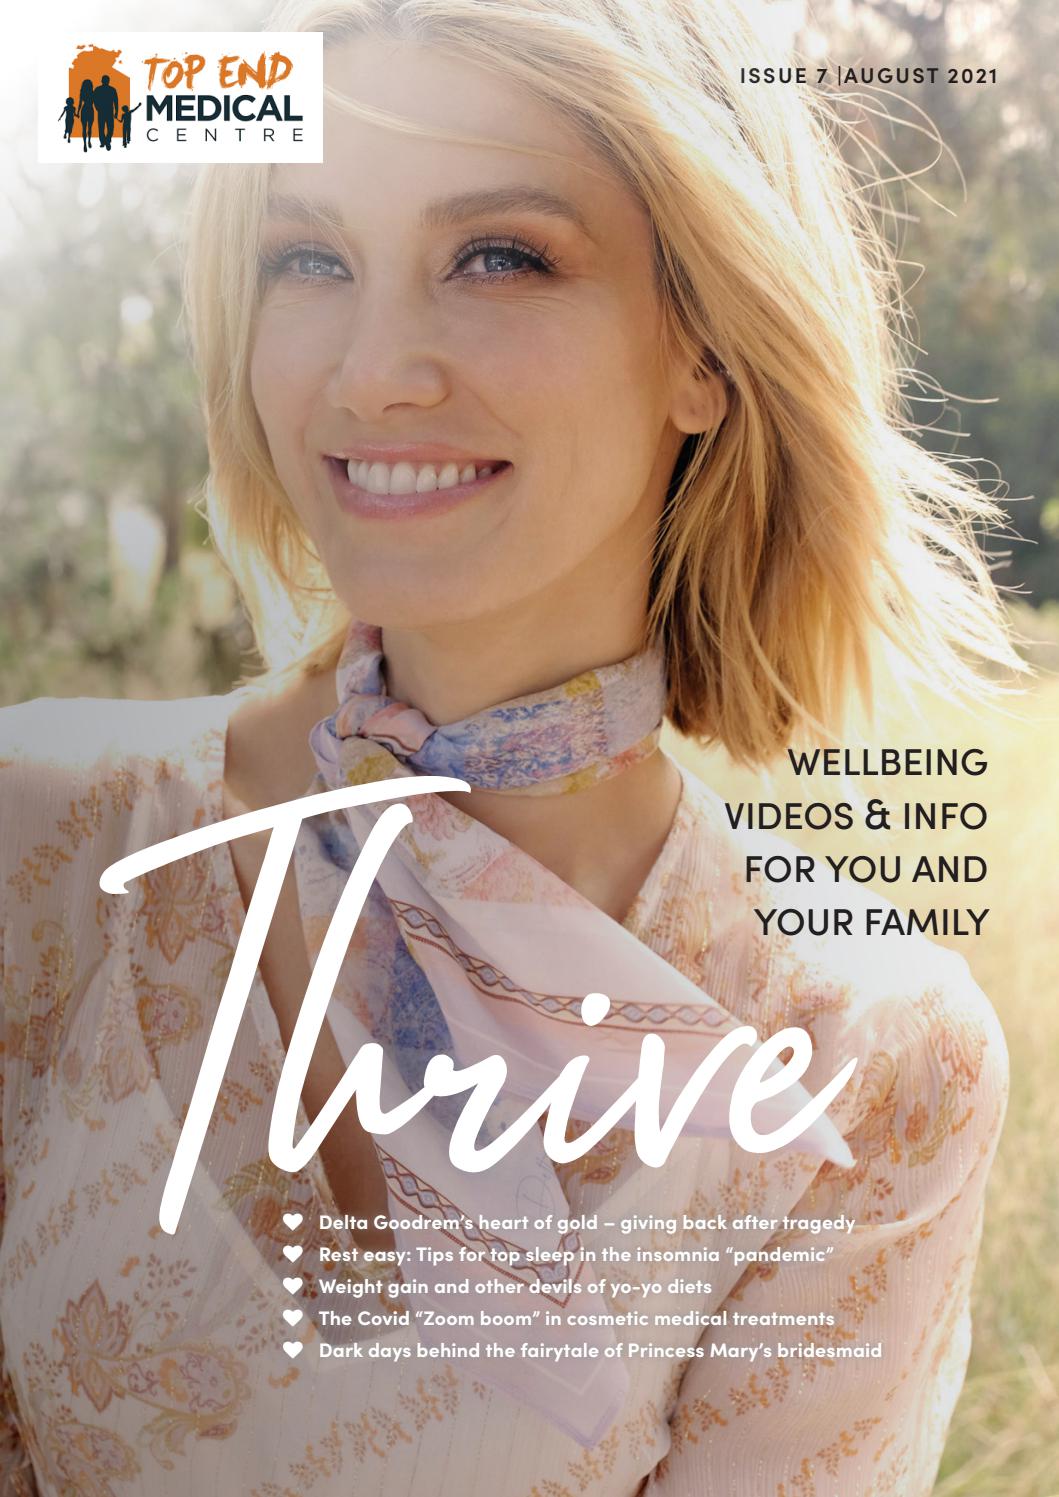 Thrive Magazine Issue 7 Top End Medical